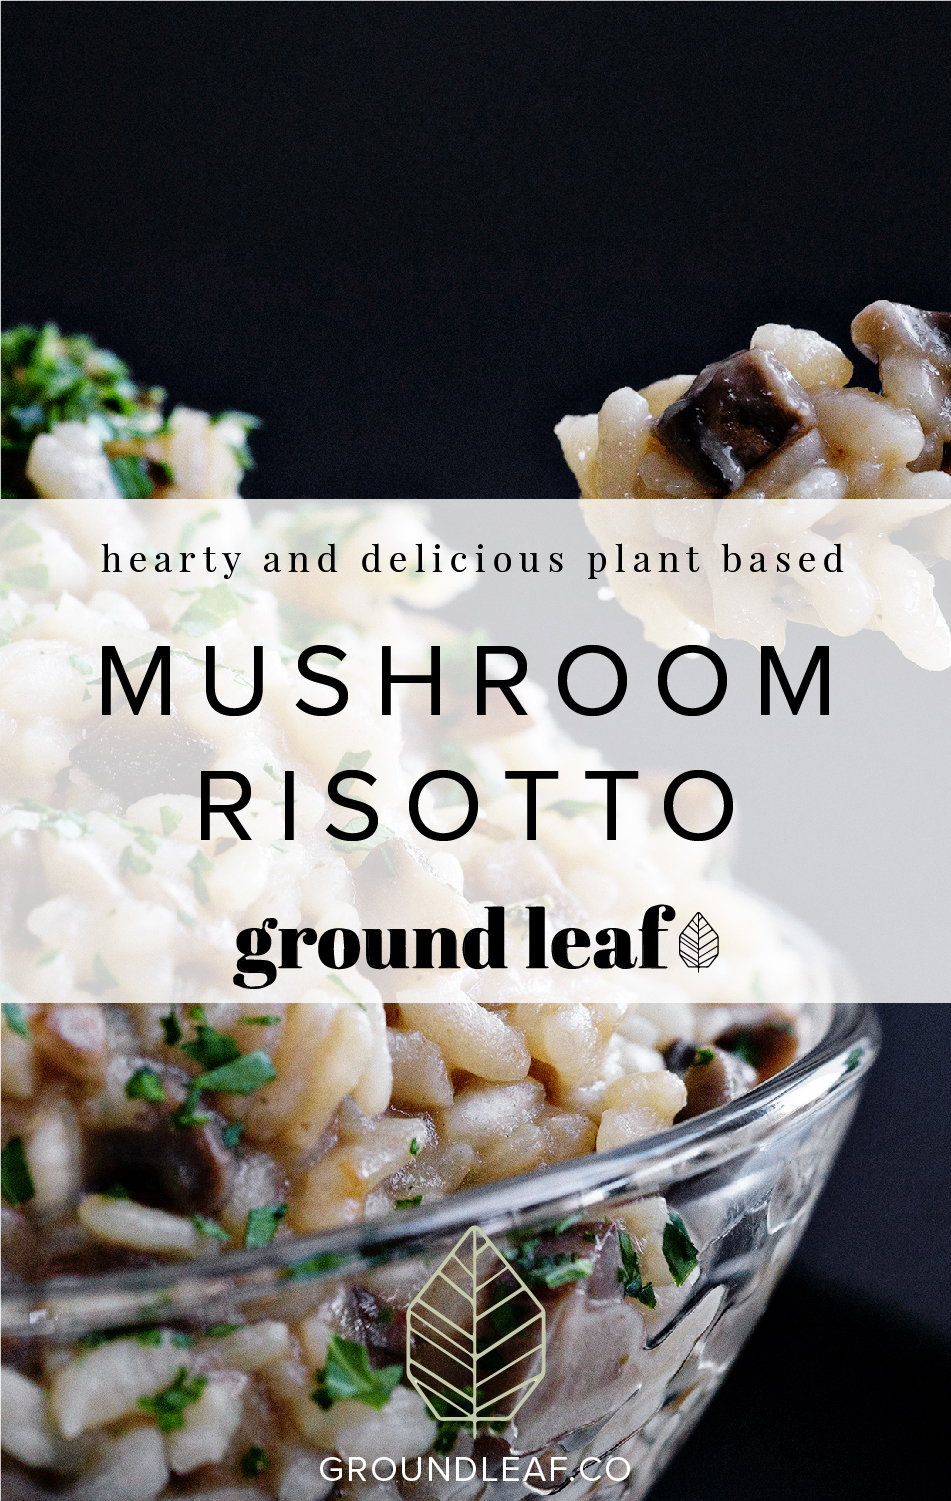 The Instant Pot Mushroom Risotto is a crowd favorite for eating. And a chef favorite for…well…laziness! You know the deal with risotto right? Add stock, stir stir stir, wait wait wait, add stock, repeat. Not here. Toss everything in the pressure cooker, kick up your feet and relax while dinner is made for you. Healthy, plant-based eating. | groundleaf.co